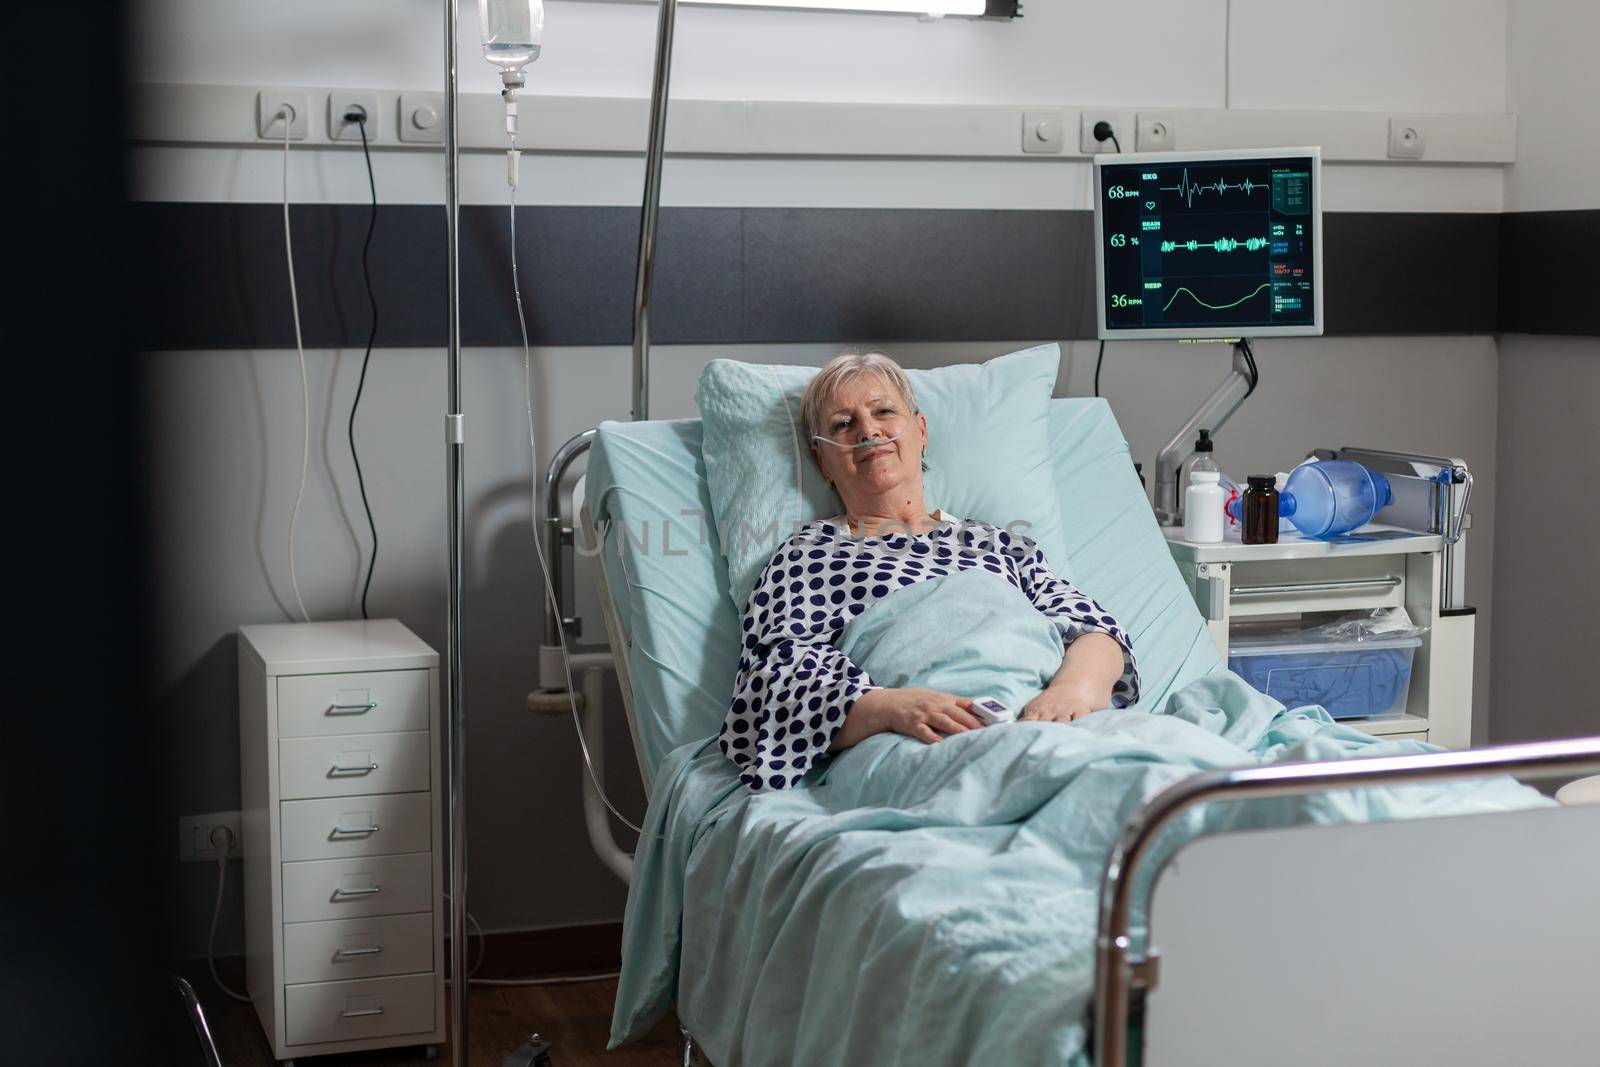 Portrait of senior woman smiling looking at camera laying in hospital bed betting treatment through iv drip bag. Breathing with help from oxygen mask during illness recovery.